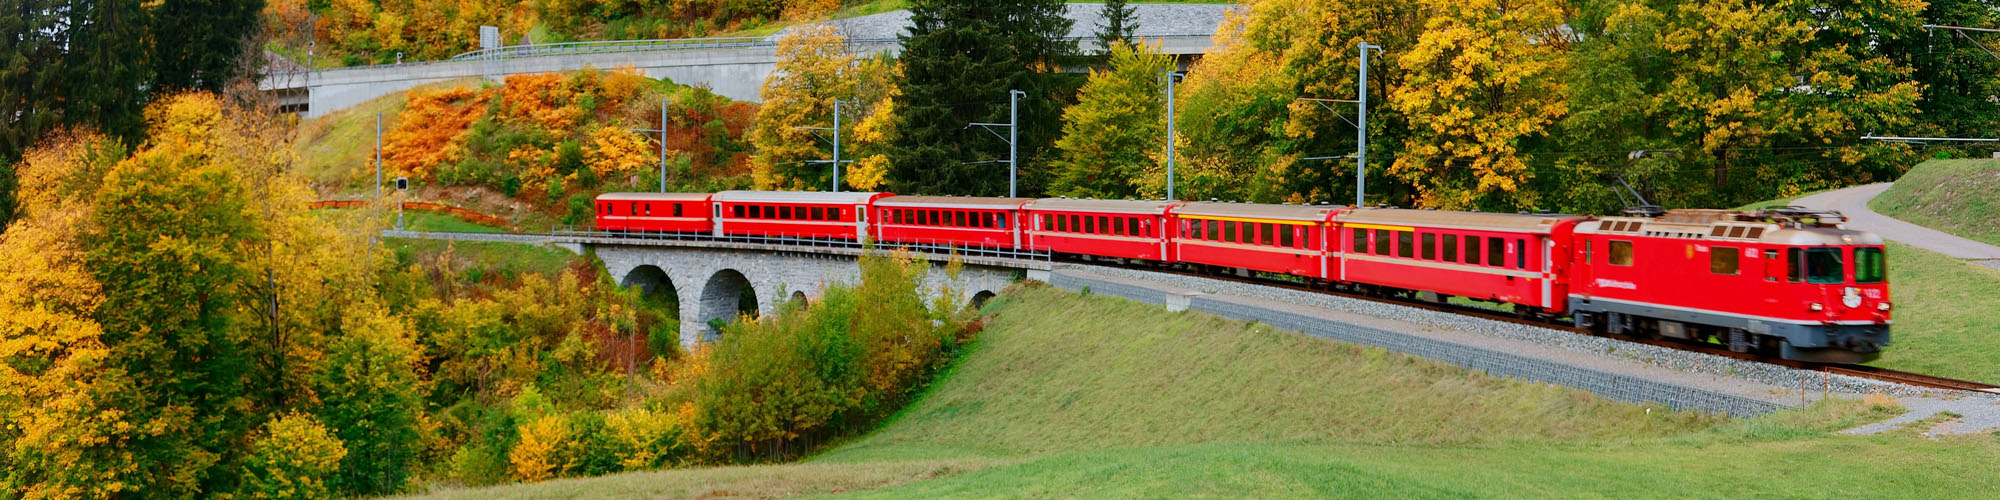 A local train of Rhaetian Railway (RhB) travels through a viaduct onto green grassy meadows with beautiful fall colors on the hillside, in Klosters village near Davos in Grisons (Graubunden), Switzerland